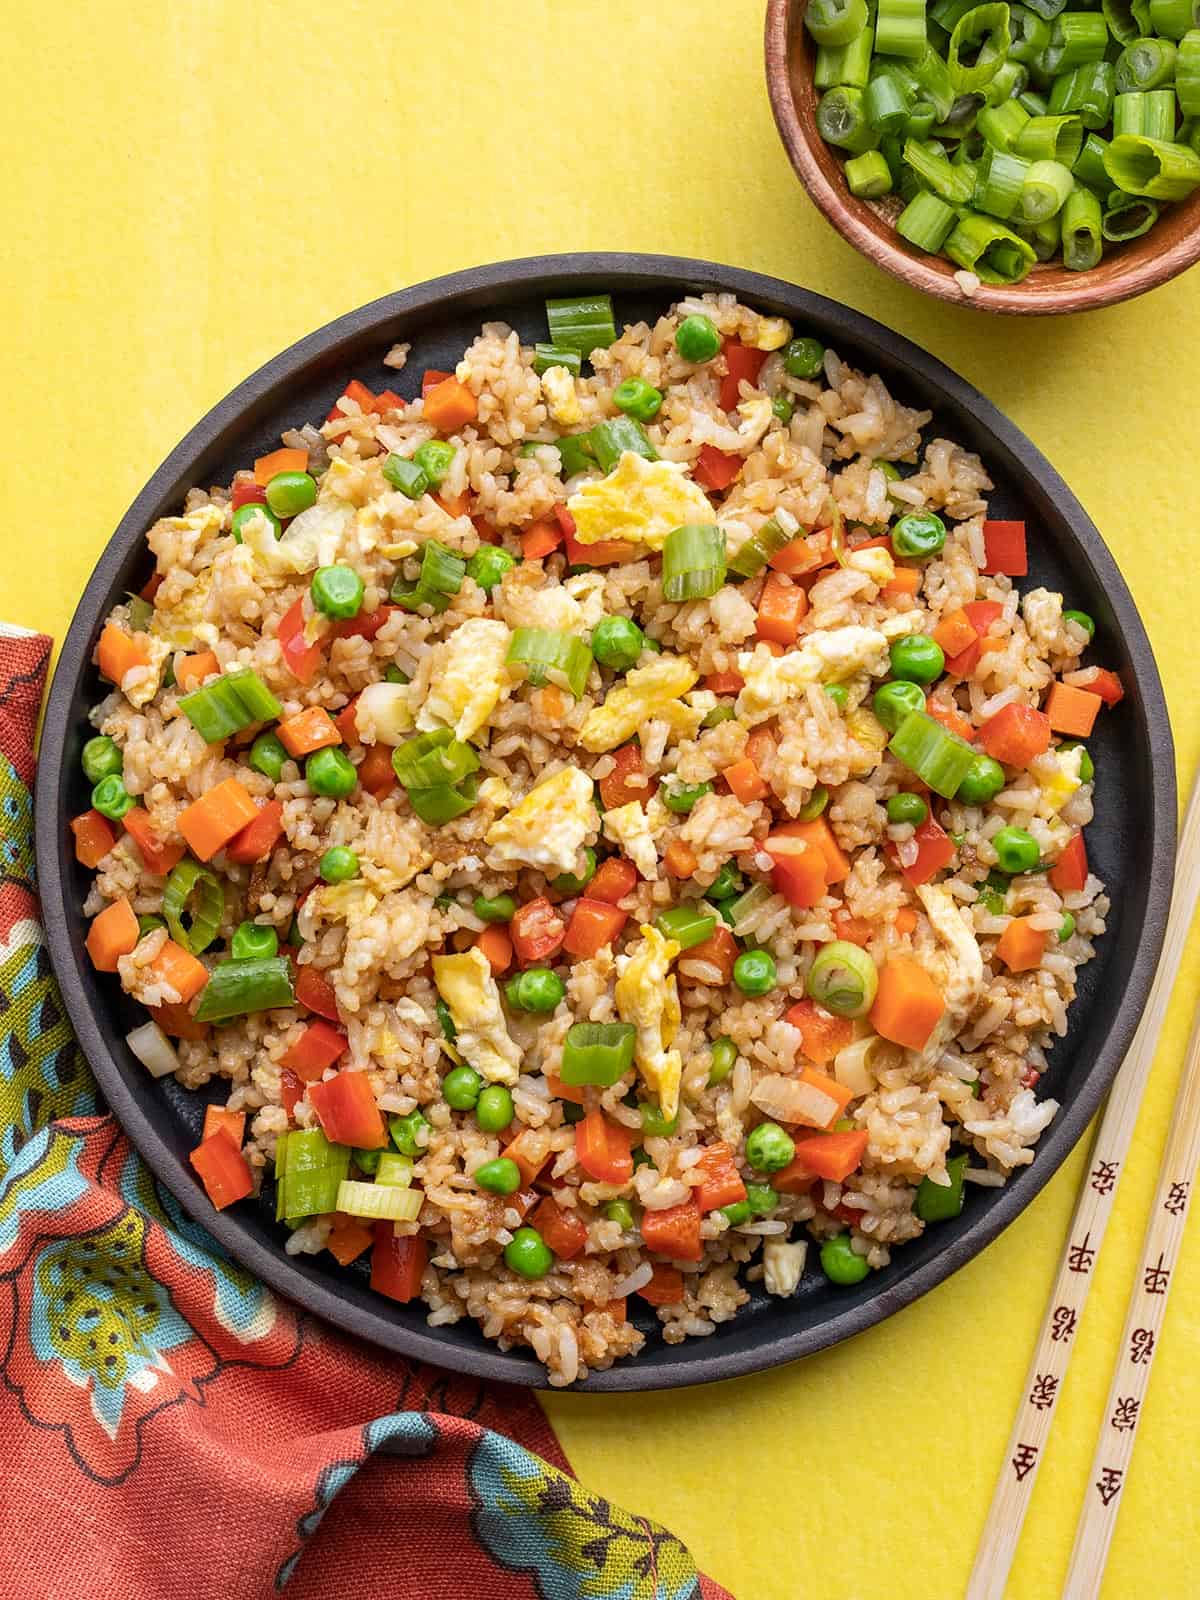 17 Quick and Easy Rice Bowl Recipes - Slender Kitchen